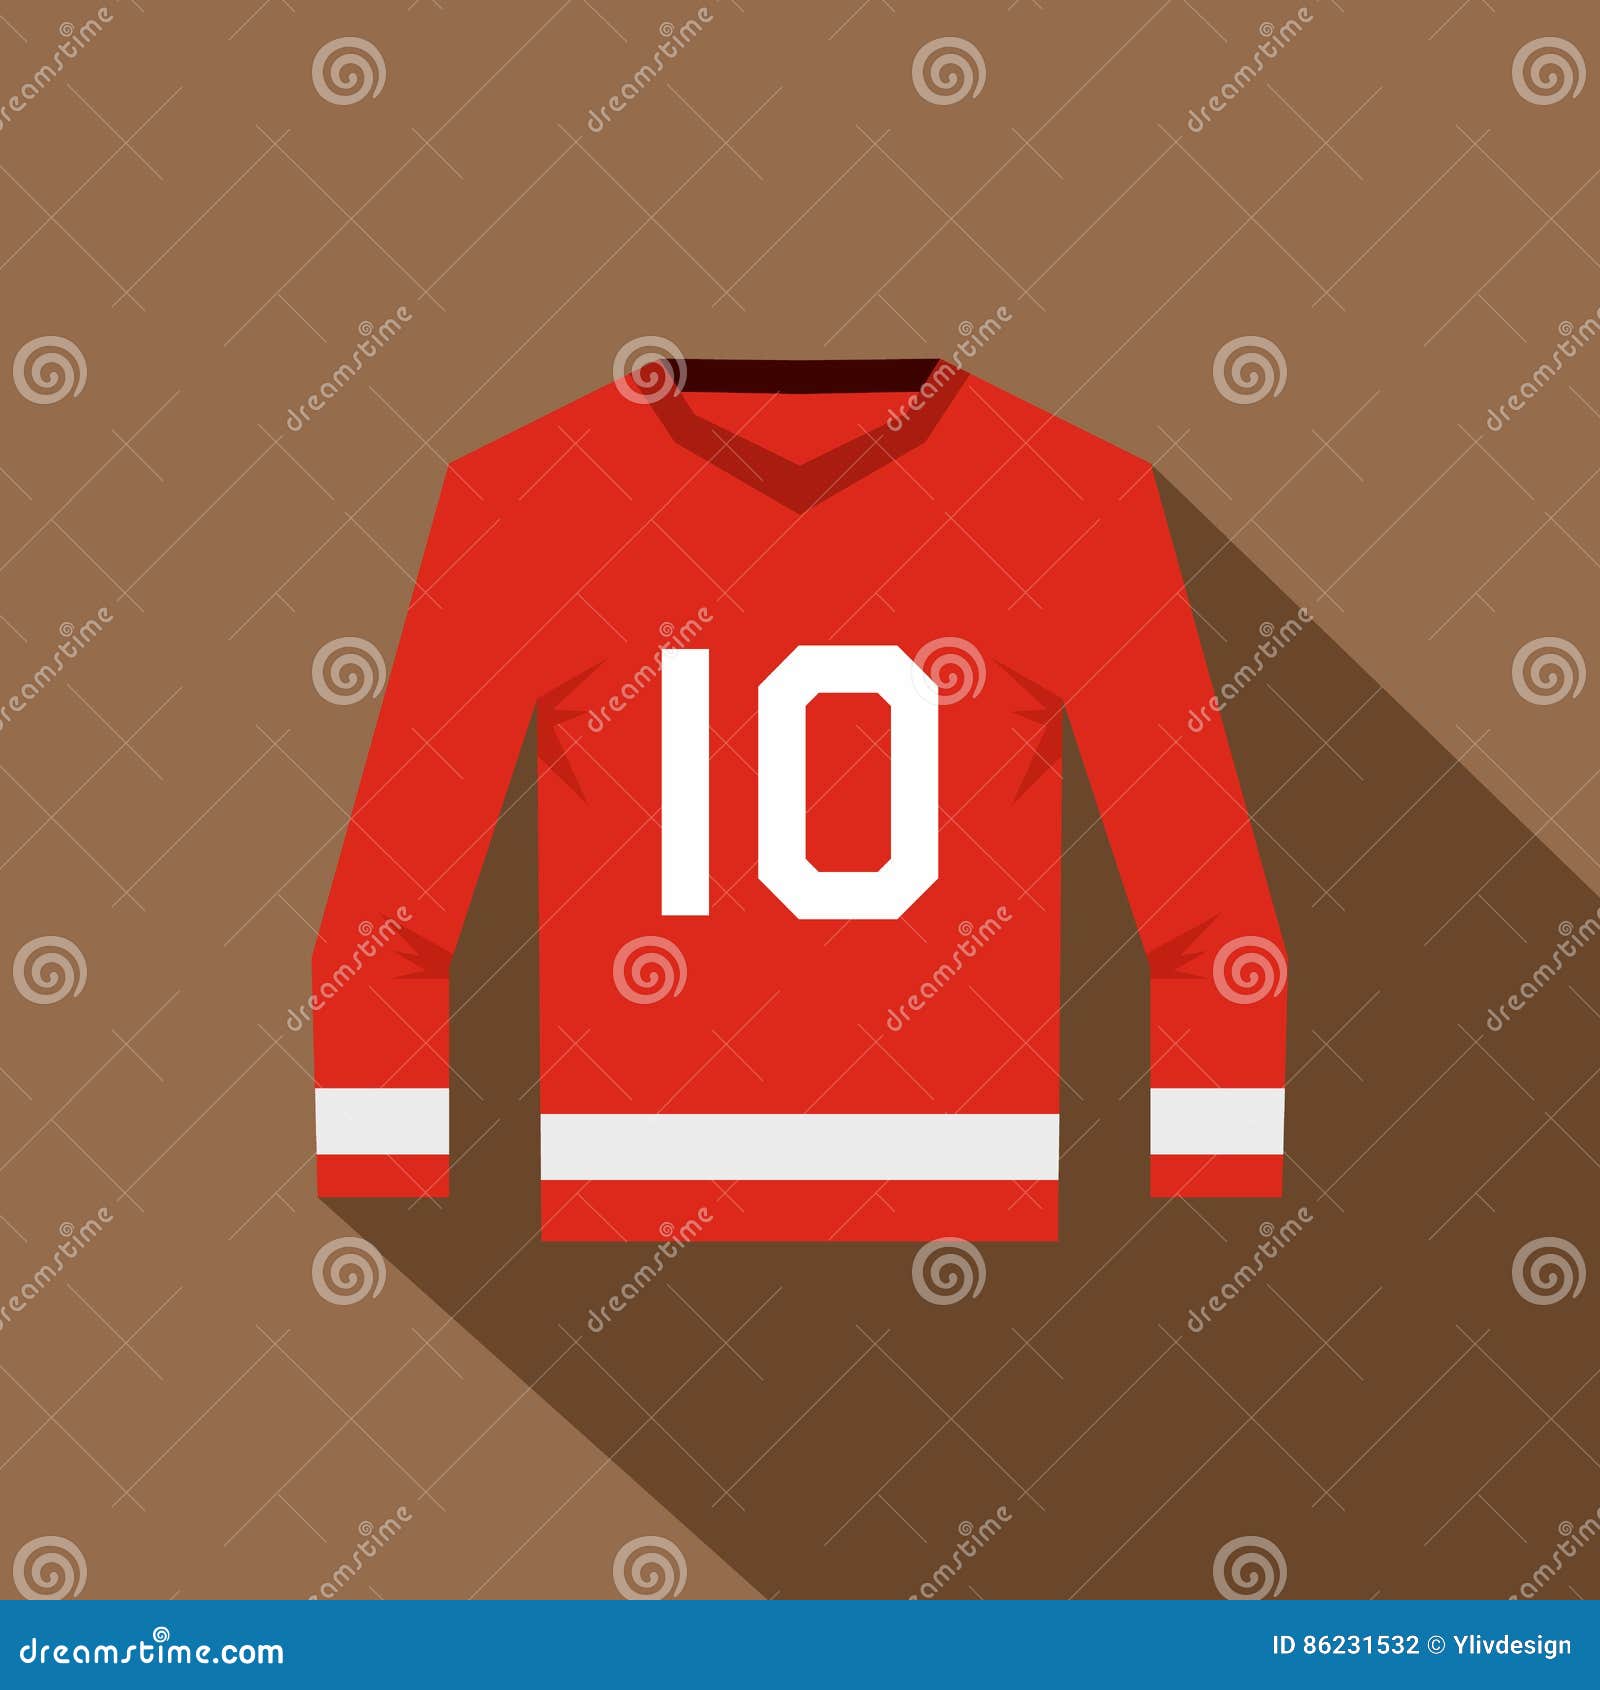 3,781 Hockey Jersey Icon Images, Stock Photos, 3D objects, & Vectors